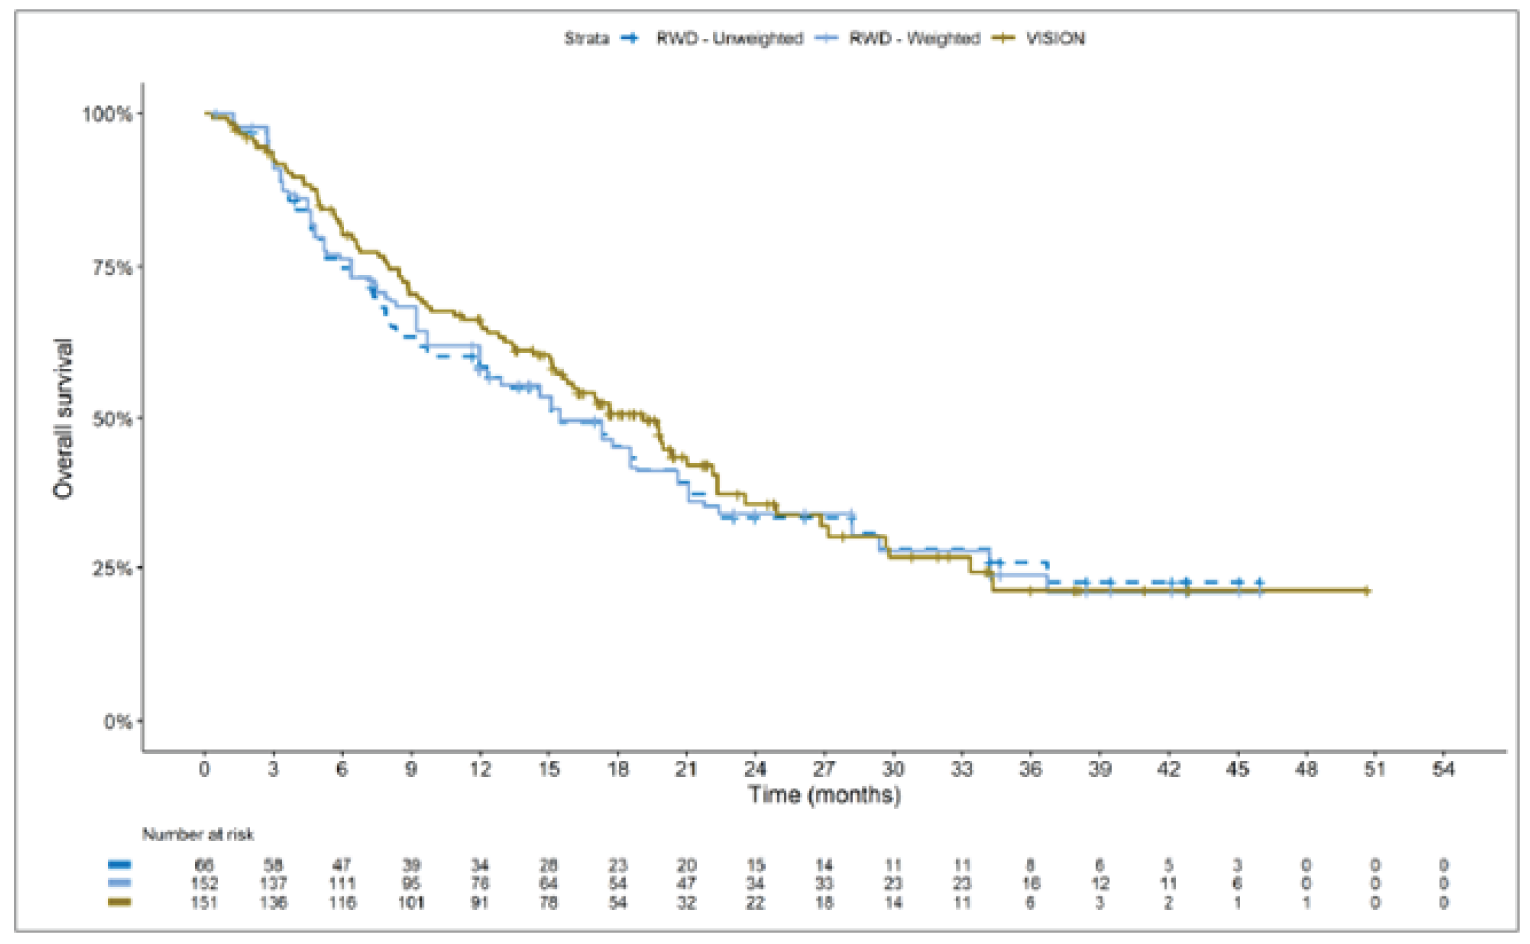 Kaplan-Meier curves with x-axis from 0 to 54 months. The chemotherapy unweighted and weighted groups largely overlap. The chemotherapy and VISION curves separate at month 3, with VISION group above the chemotherapy groups, cross at month 27, then converge at month 30. All curves plateau at month 36.